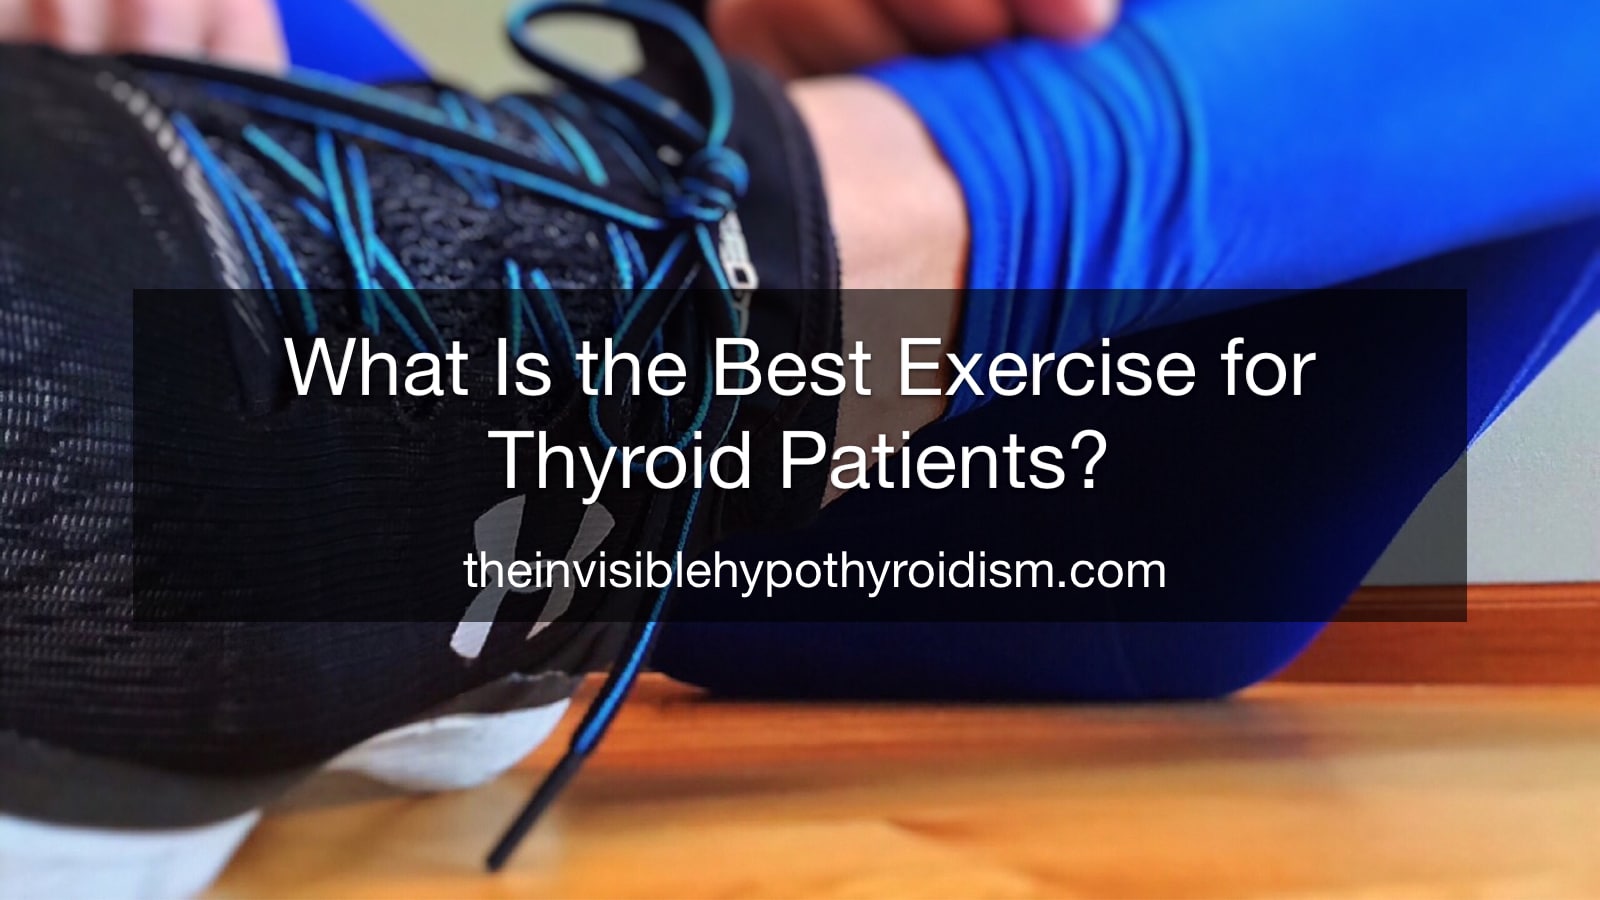 What Is the Best Exercise for Thyroid Patients?